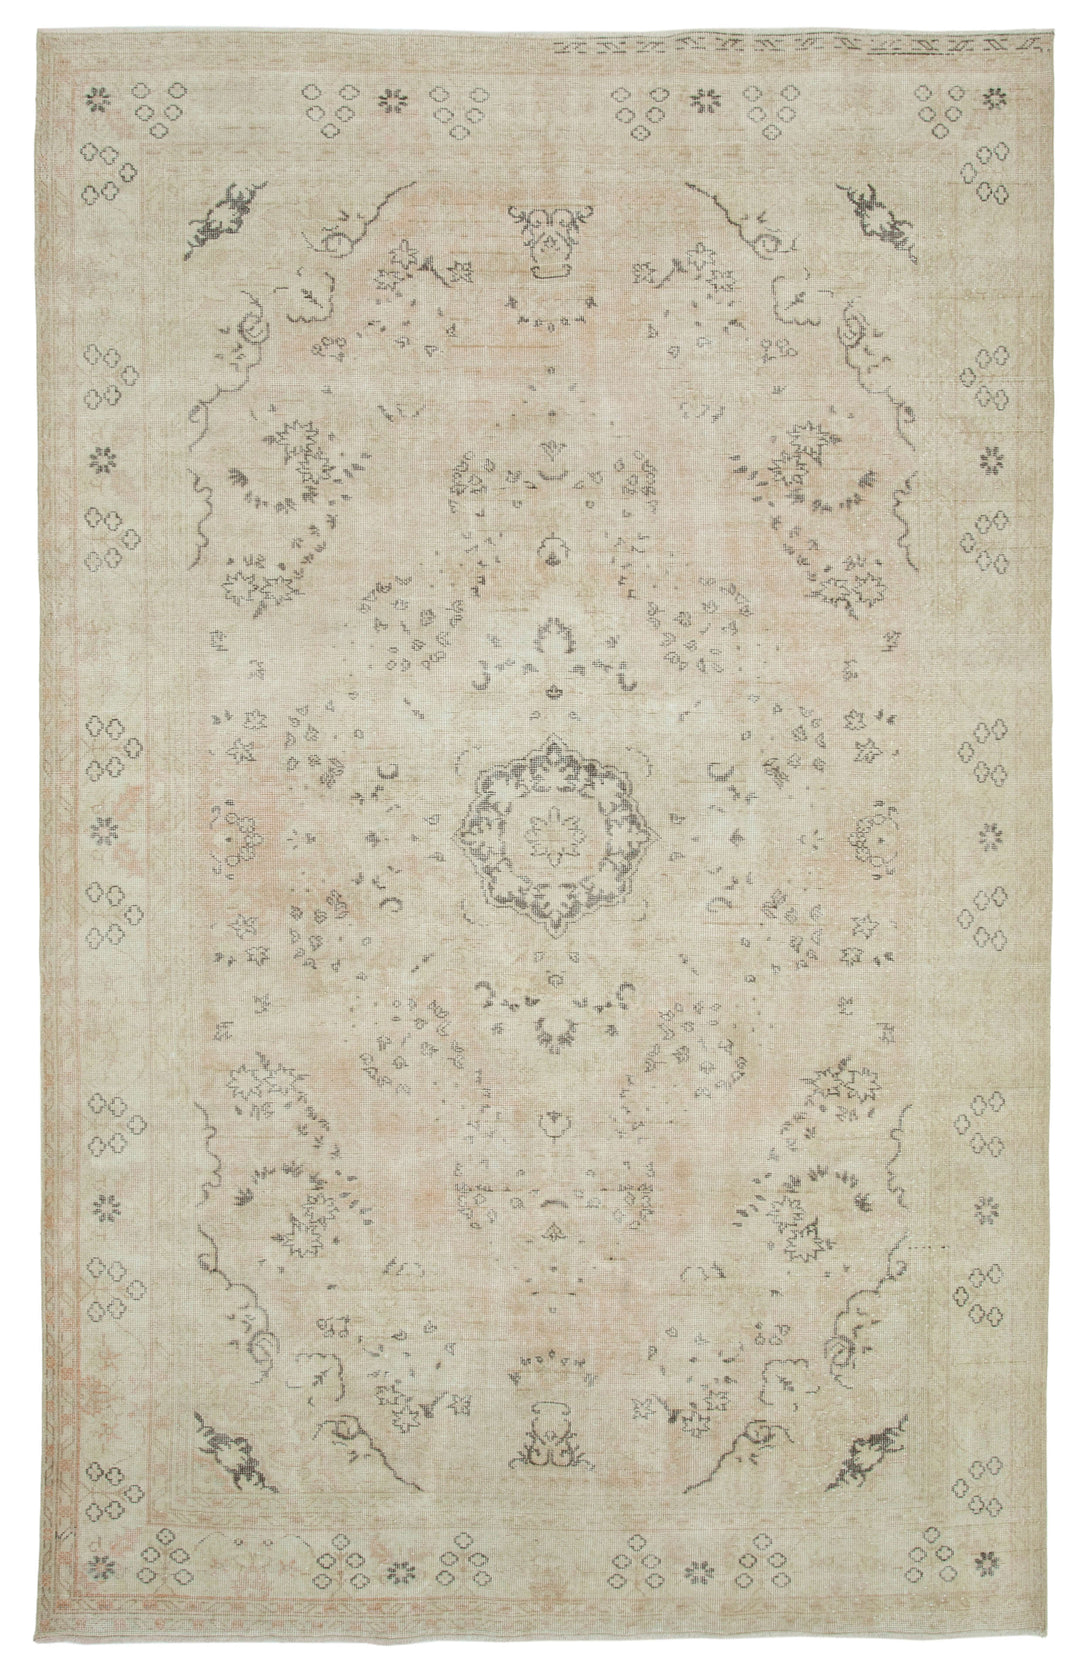 Handmade White Wash Area Rug > Design# OL-AC-33980 > Size: 6'-11" x 10'-11", Carpet Culture Rugs, Handmade Rugs, NYC Rugs, New Rugs, Shop Rugs, Rug Store, Outlet Rugs, SoHo Rugs, Rugs in USA